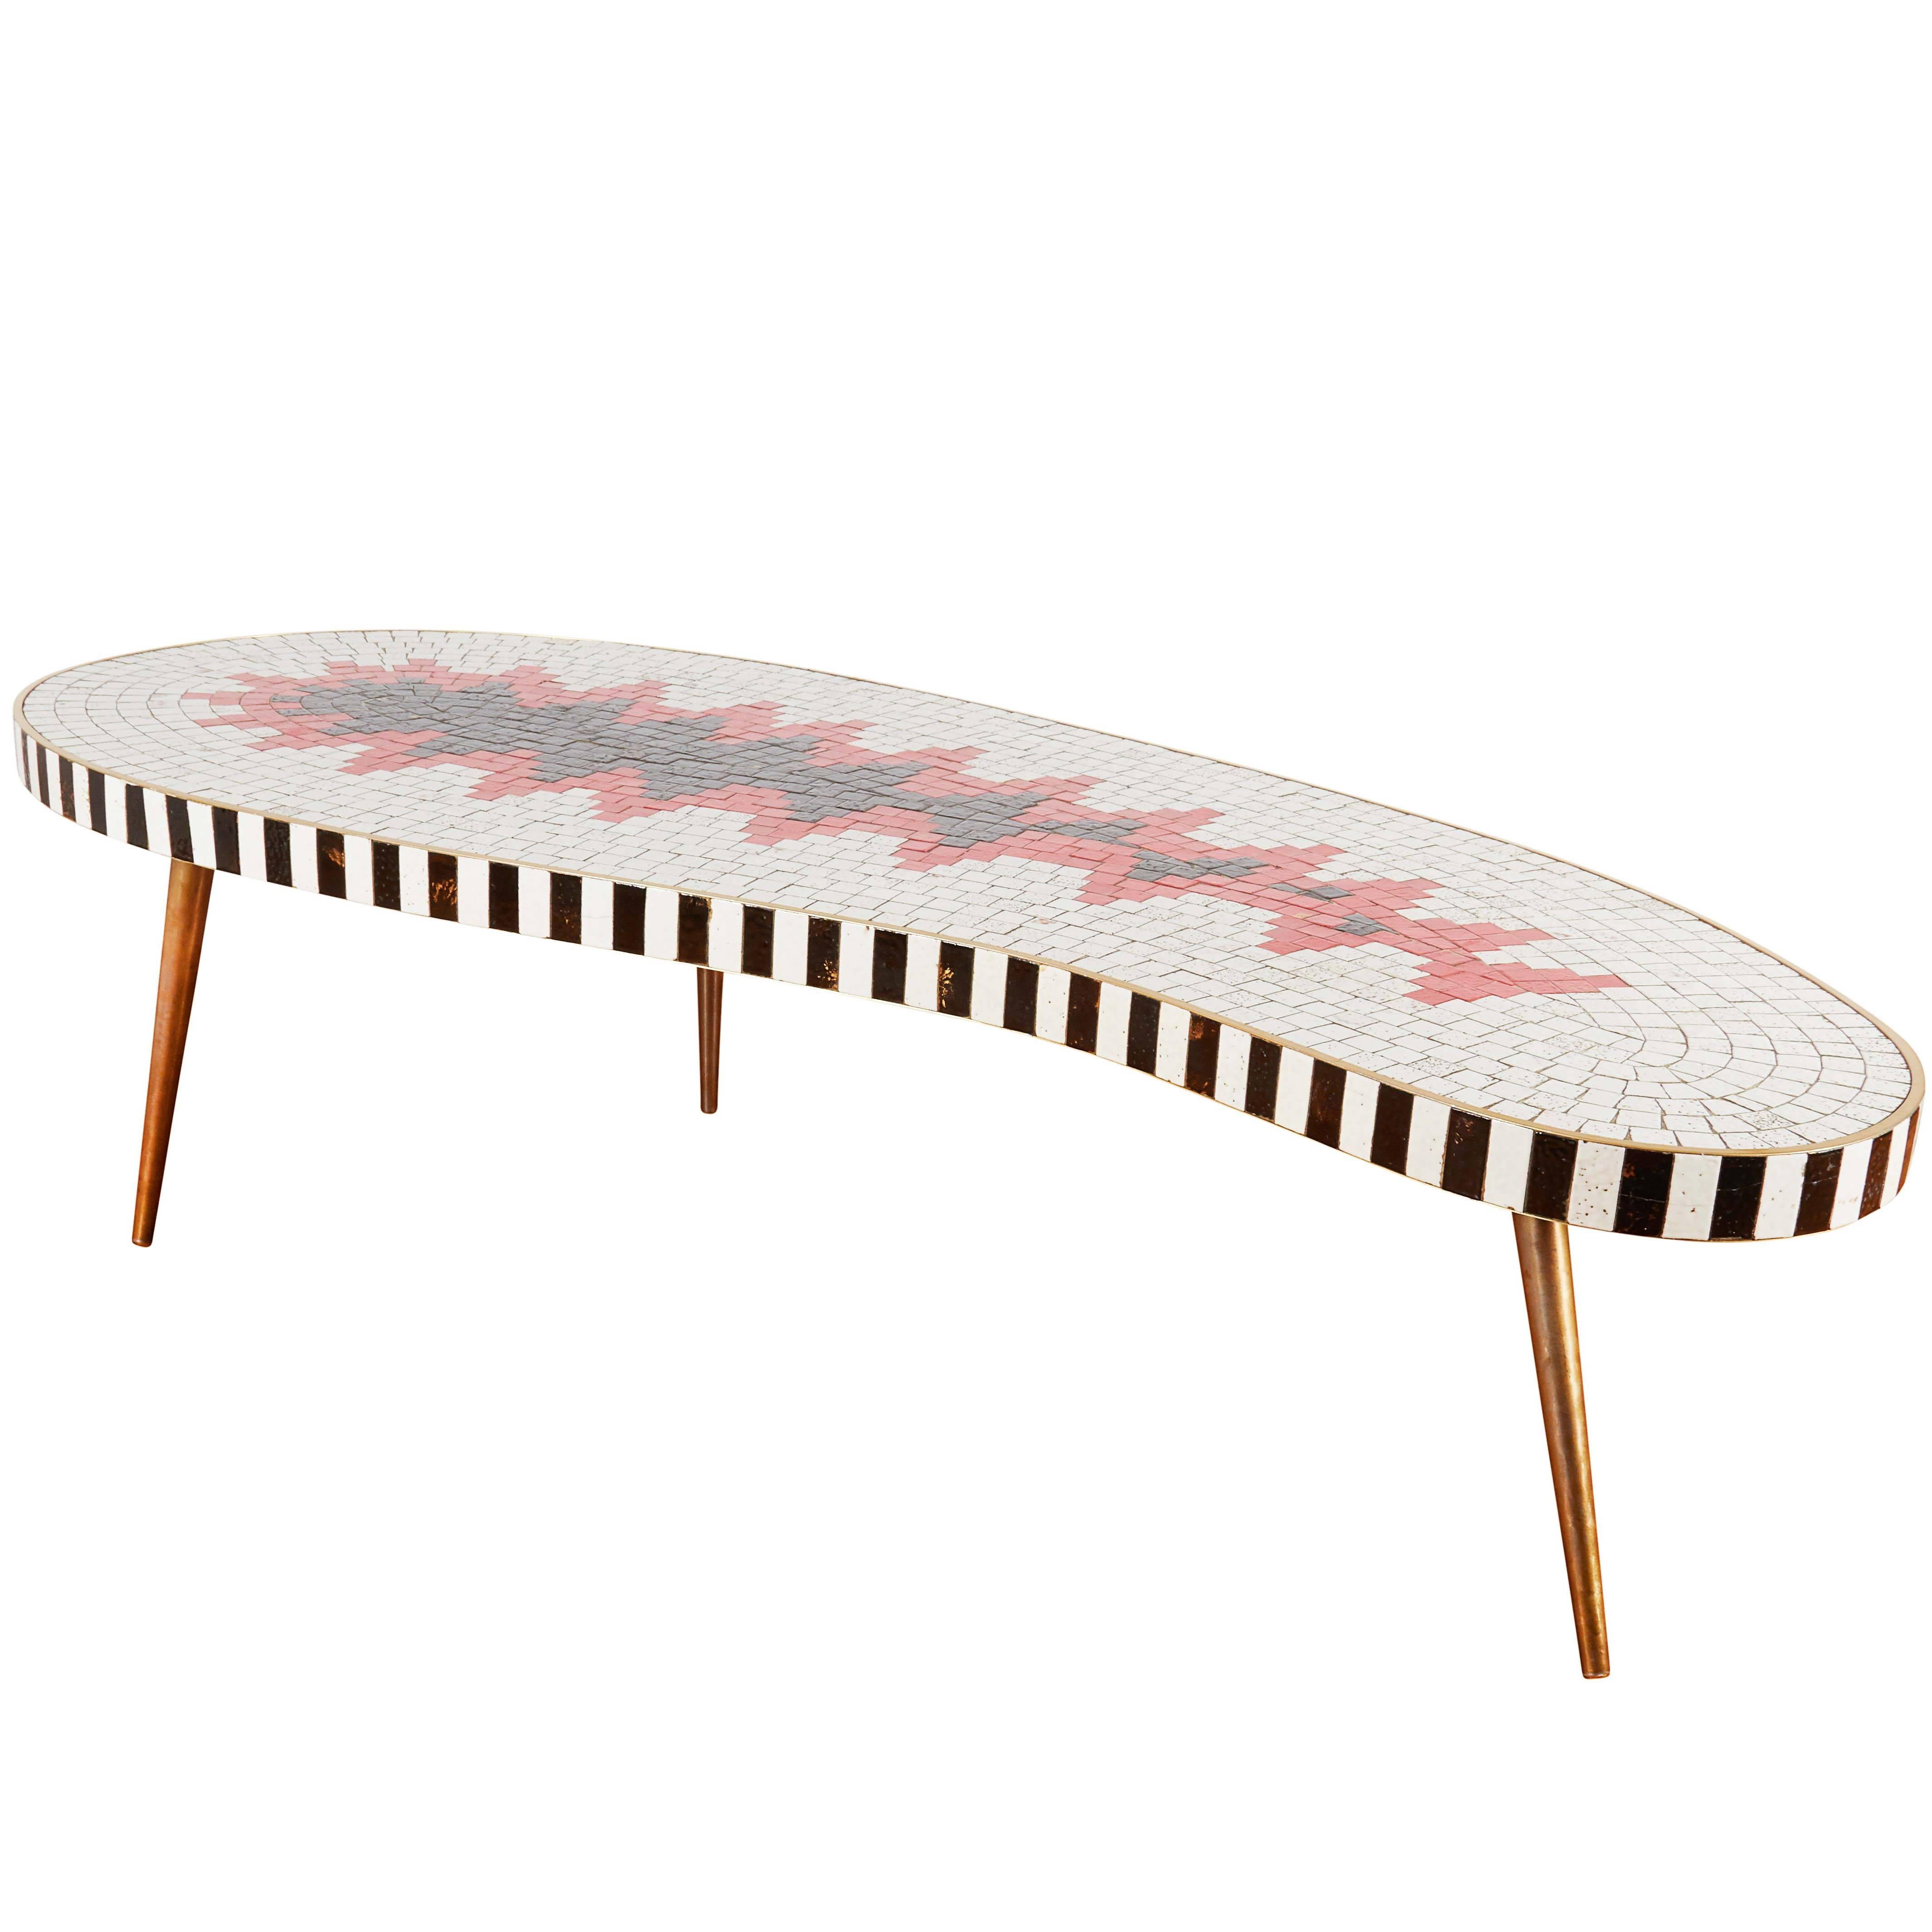 Mosaic Tiled Top Kidney Shaped Coffee Table